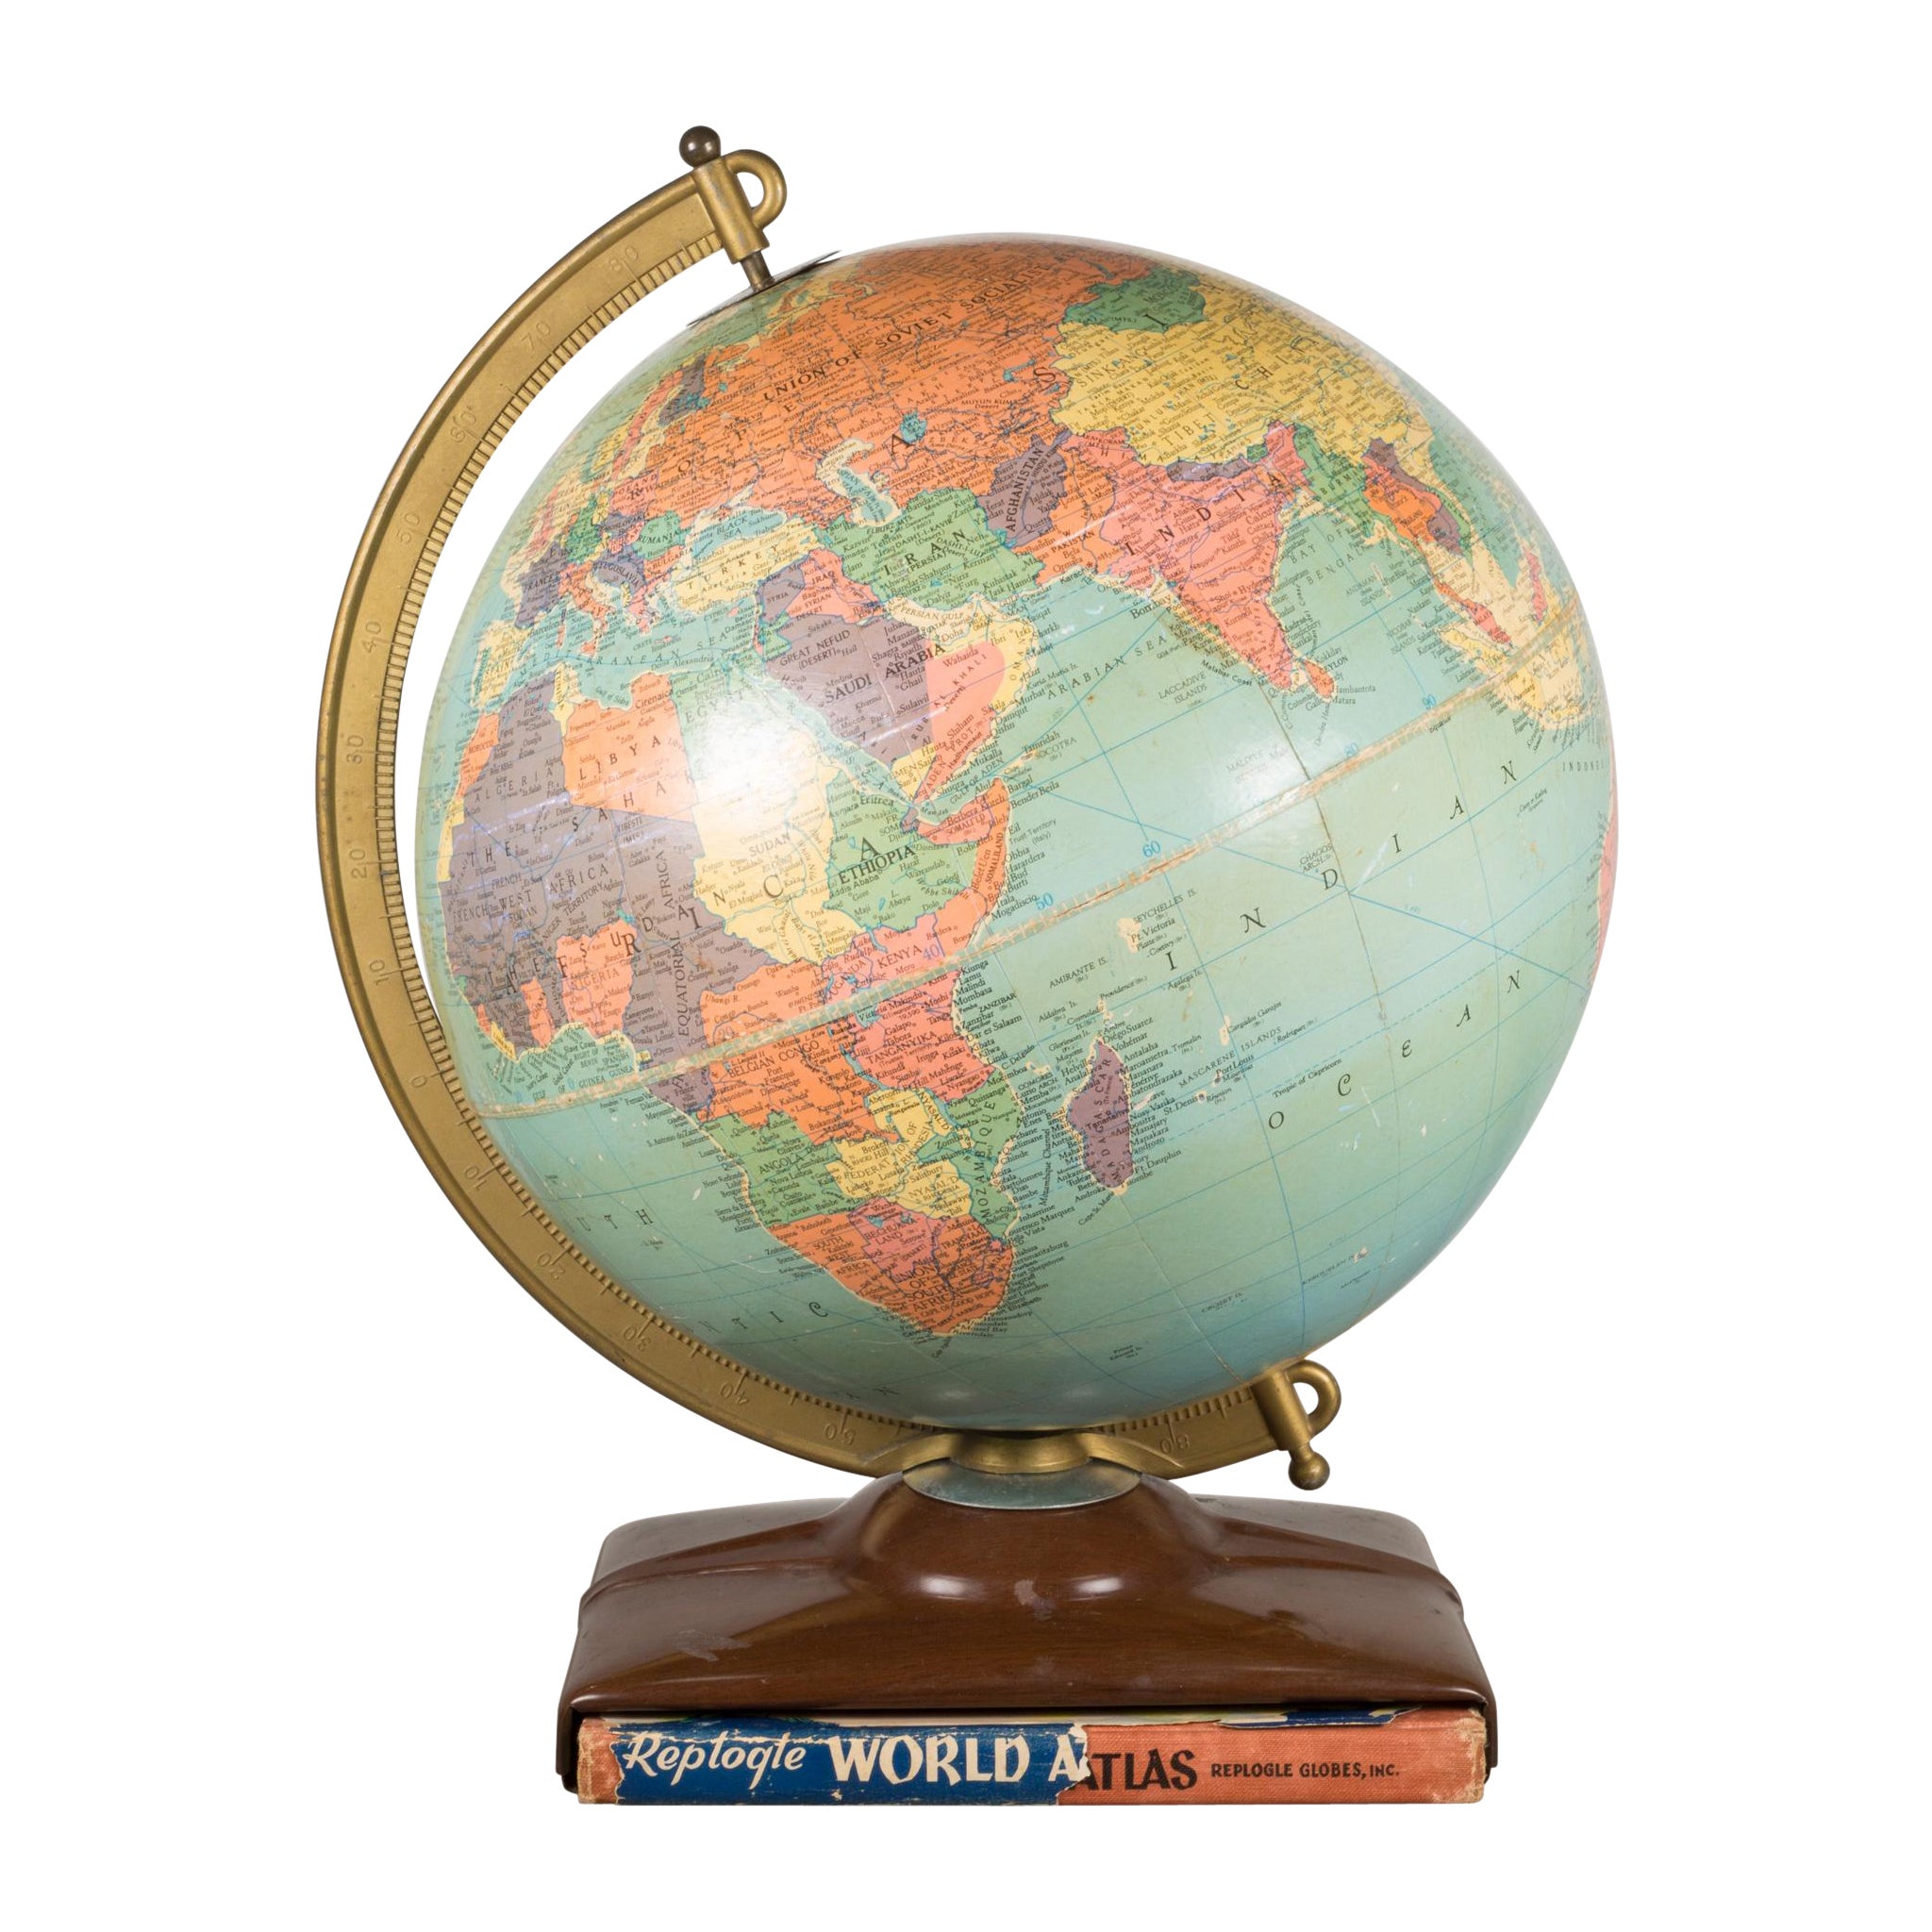 What is a Replogle Globe?